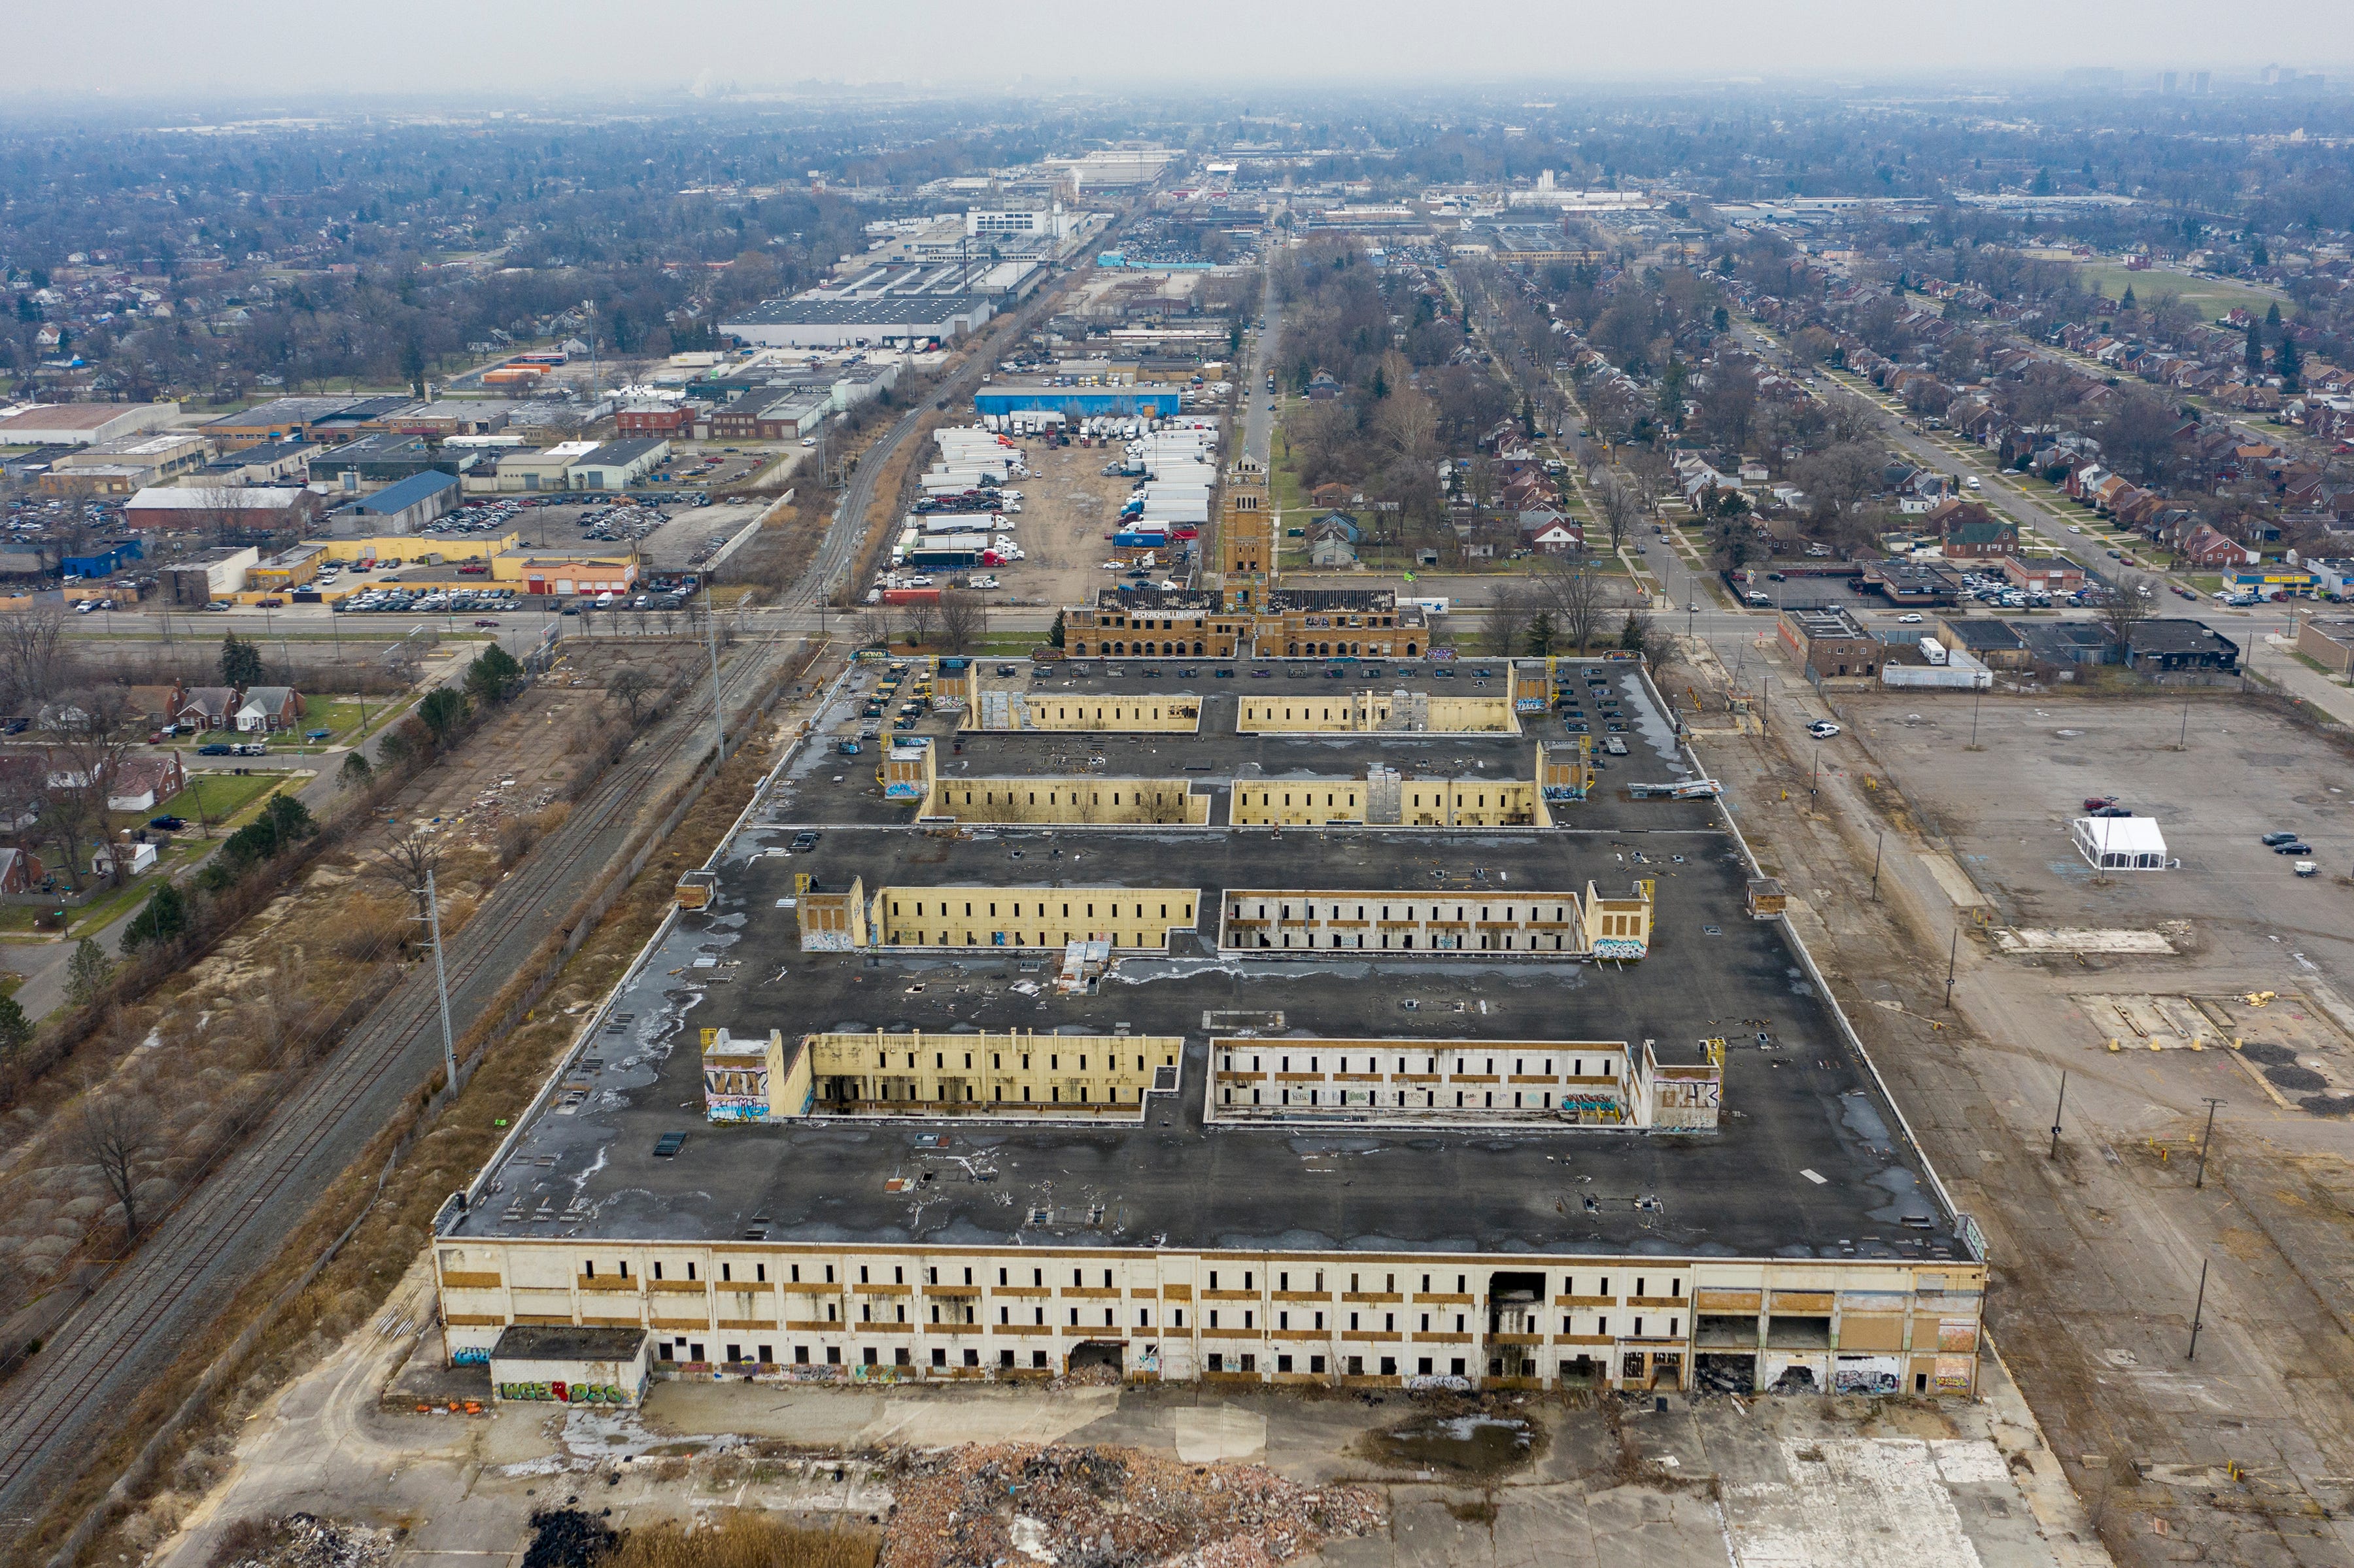 An aerial view of the former American Motor headquarters in Detroit that has sat abandoned since 2010, on Thursday, Dec. 9, 2021. An agreement between NorthPoint Development and the city would sell the city-owned land, including the buildings and 26 residential parcels, to NorthPoint Development for nearly $5.9 million. The company proposes to raze the existing facility and build a new industrial complex suitable for an automotive supplier.